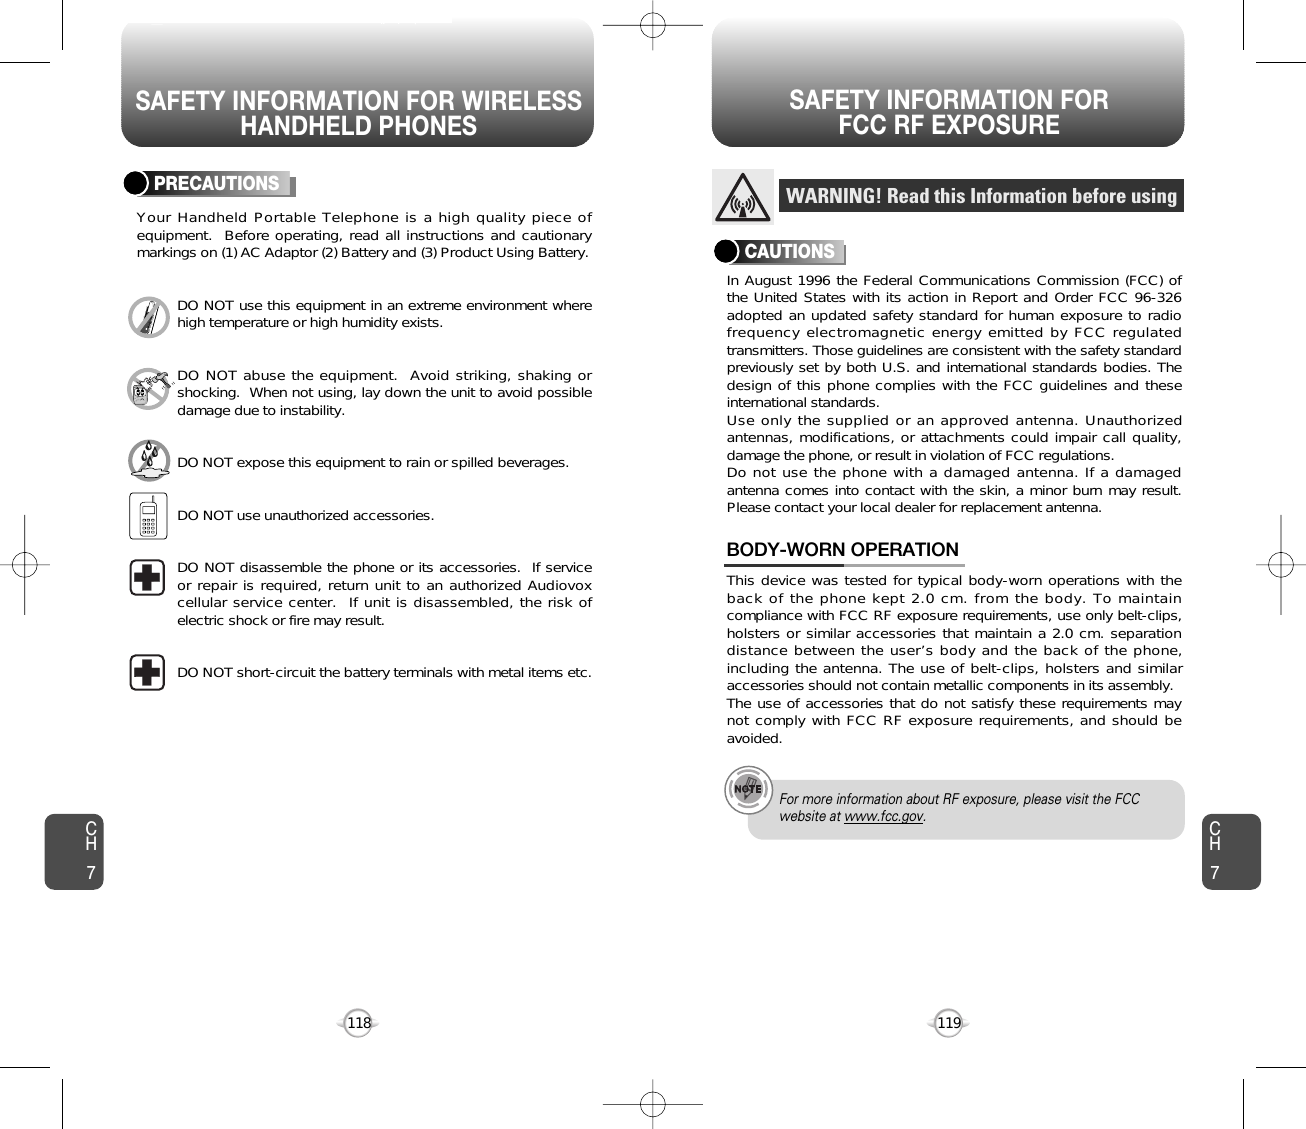 SAFETY INFORMATION FOR WIRELESSHANDHELD PHONESSAFETY INFORMATION FOR FCC RF EXPOSURE119118PRECAUTIONSYour Handheld Portable Telephone is a high quality piece ofequipment.  Before operating, read all instructions and cautionarymarkings on (1) AC Adaptor (2) Battery and (3) Product Using Battery.DO NOT use this equipment in an extreme environment wherehigh temperature or high humidity exists.DO NOT abuse the equipment.  Avoid striking, shaking orshocking.  When not using, lay down the unit to avoid possibledamage due to instability.DO NOT expose this equipment to rain or spilled beverages.DO NOT use unauthorized accessories.DO NOT disassemble the phone or its accessories.  If serviceor repair is required, return unit to an authorized Audiovoxcellular service center.  If unit is disassembled, the risk ofelectric shock or fire may result.DO NOT short-circuit the battery terminals with metal items etc.In August 1996 the Federal Communications Commission (FCC) ofthe United States with its action in Report and Order FCC 96-326adopted an updated safety standard for human exposure to radiofrequency electromagnetic energy emitted by FCC regulatedtransmitters. Those guidelines are consistent with the safety standardpreviously set by both U.S. and international standards bodies. Thedesign of this phone complies with the FCC guidelines and theseinternational standards.Use only the supplied or an approved antenna. Unauthorizedantennas, modifications, or attachments could impair call quality,damage the phone, or result in violation of FCC regulations.Do not use the phone with a damaged antenna. If a damagedantenna comes into contact with the skin, a minor burn may result.Please contact your local dealer for replacement antenna.This device was tested for typical body-worn operations with theback of the phone kept 2.0 cm. from the body. To maintaincompliance with FCC RF exposure requirements, use only belt-clips,holsters or similar accessories that maintain a 2.0 cm. separationdistance between the user’s body and the back of the phone,including the antenna. The use of belt-clips, holsters and similaraccessories should not contain metallic components in its assembly.The use of accessories that do not satisfy these requirements maynot comply with FCC RF exposure requirements, and should beavoided.BODY-WORN OPERATIONWARNING! Read this Information before usingCAUTIONSFor more information about RF exposure, please visit the FCCwebsite at www.fcc.gov.CH7CH7